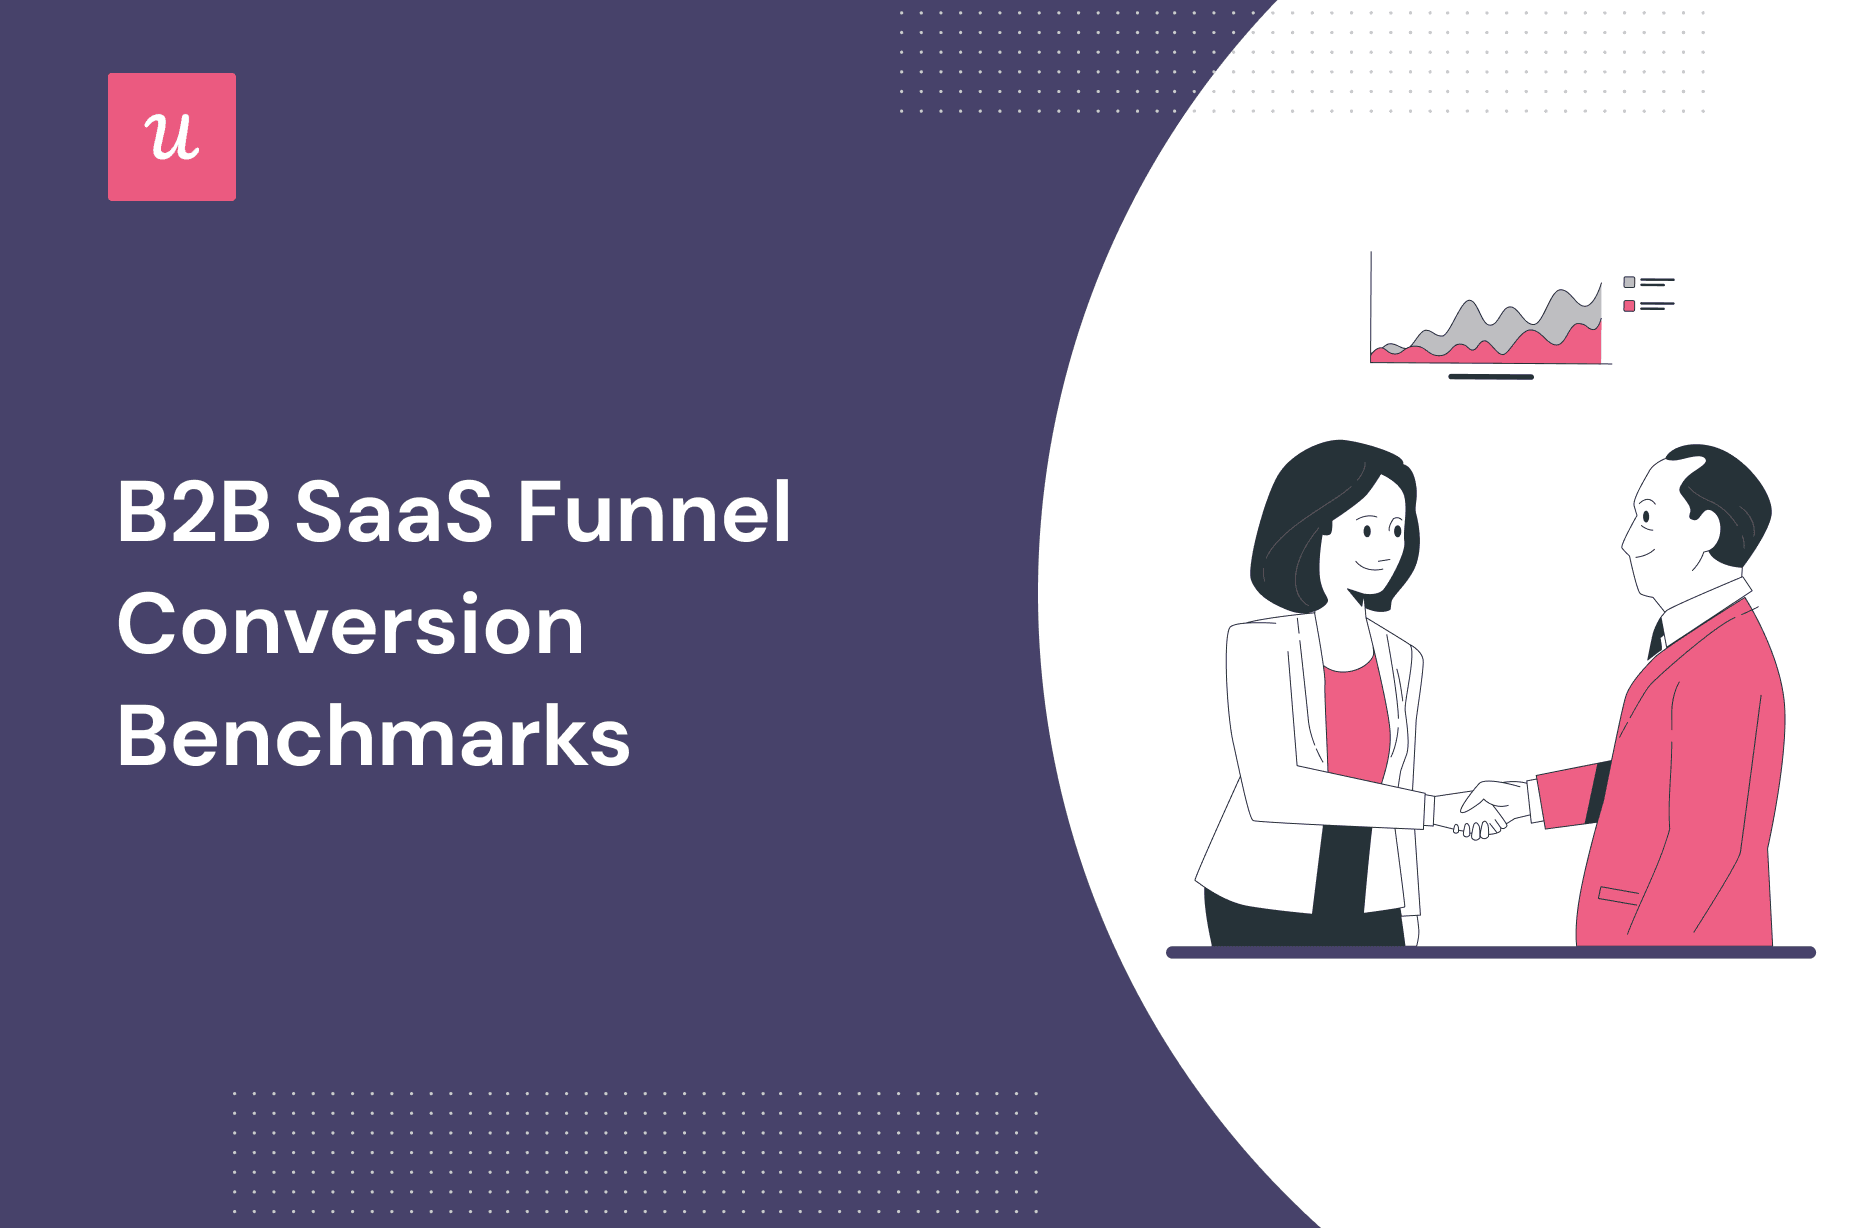 B2B SaaS Funnel Conversion Benchmarks cover